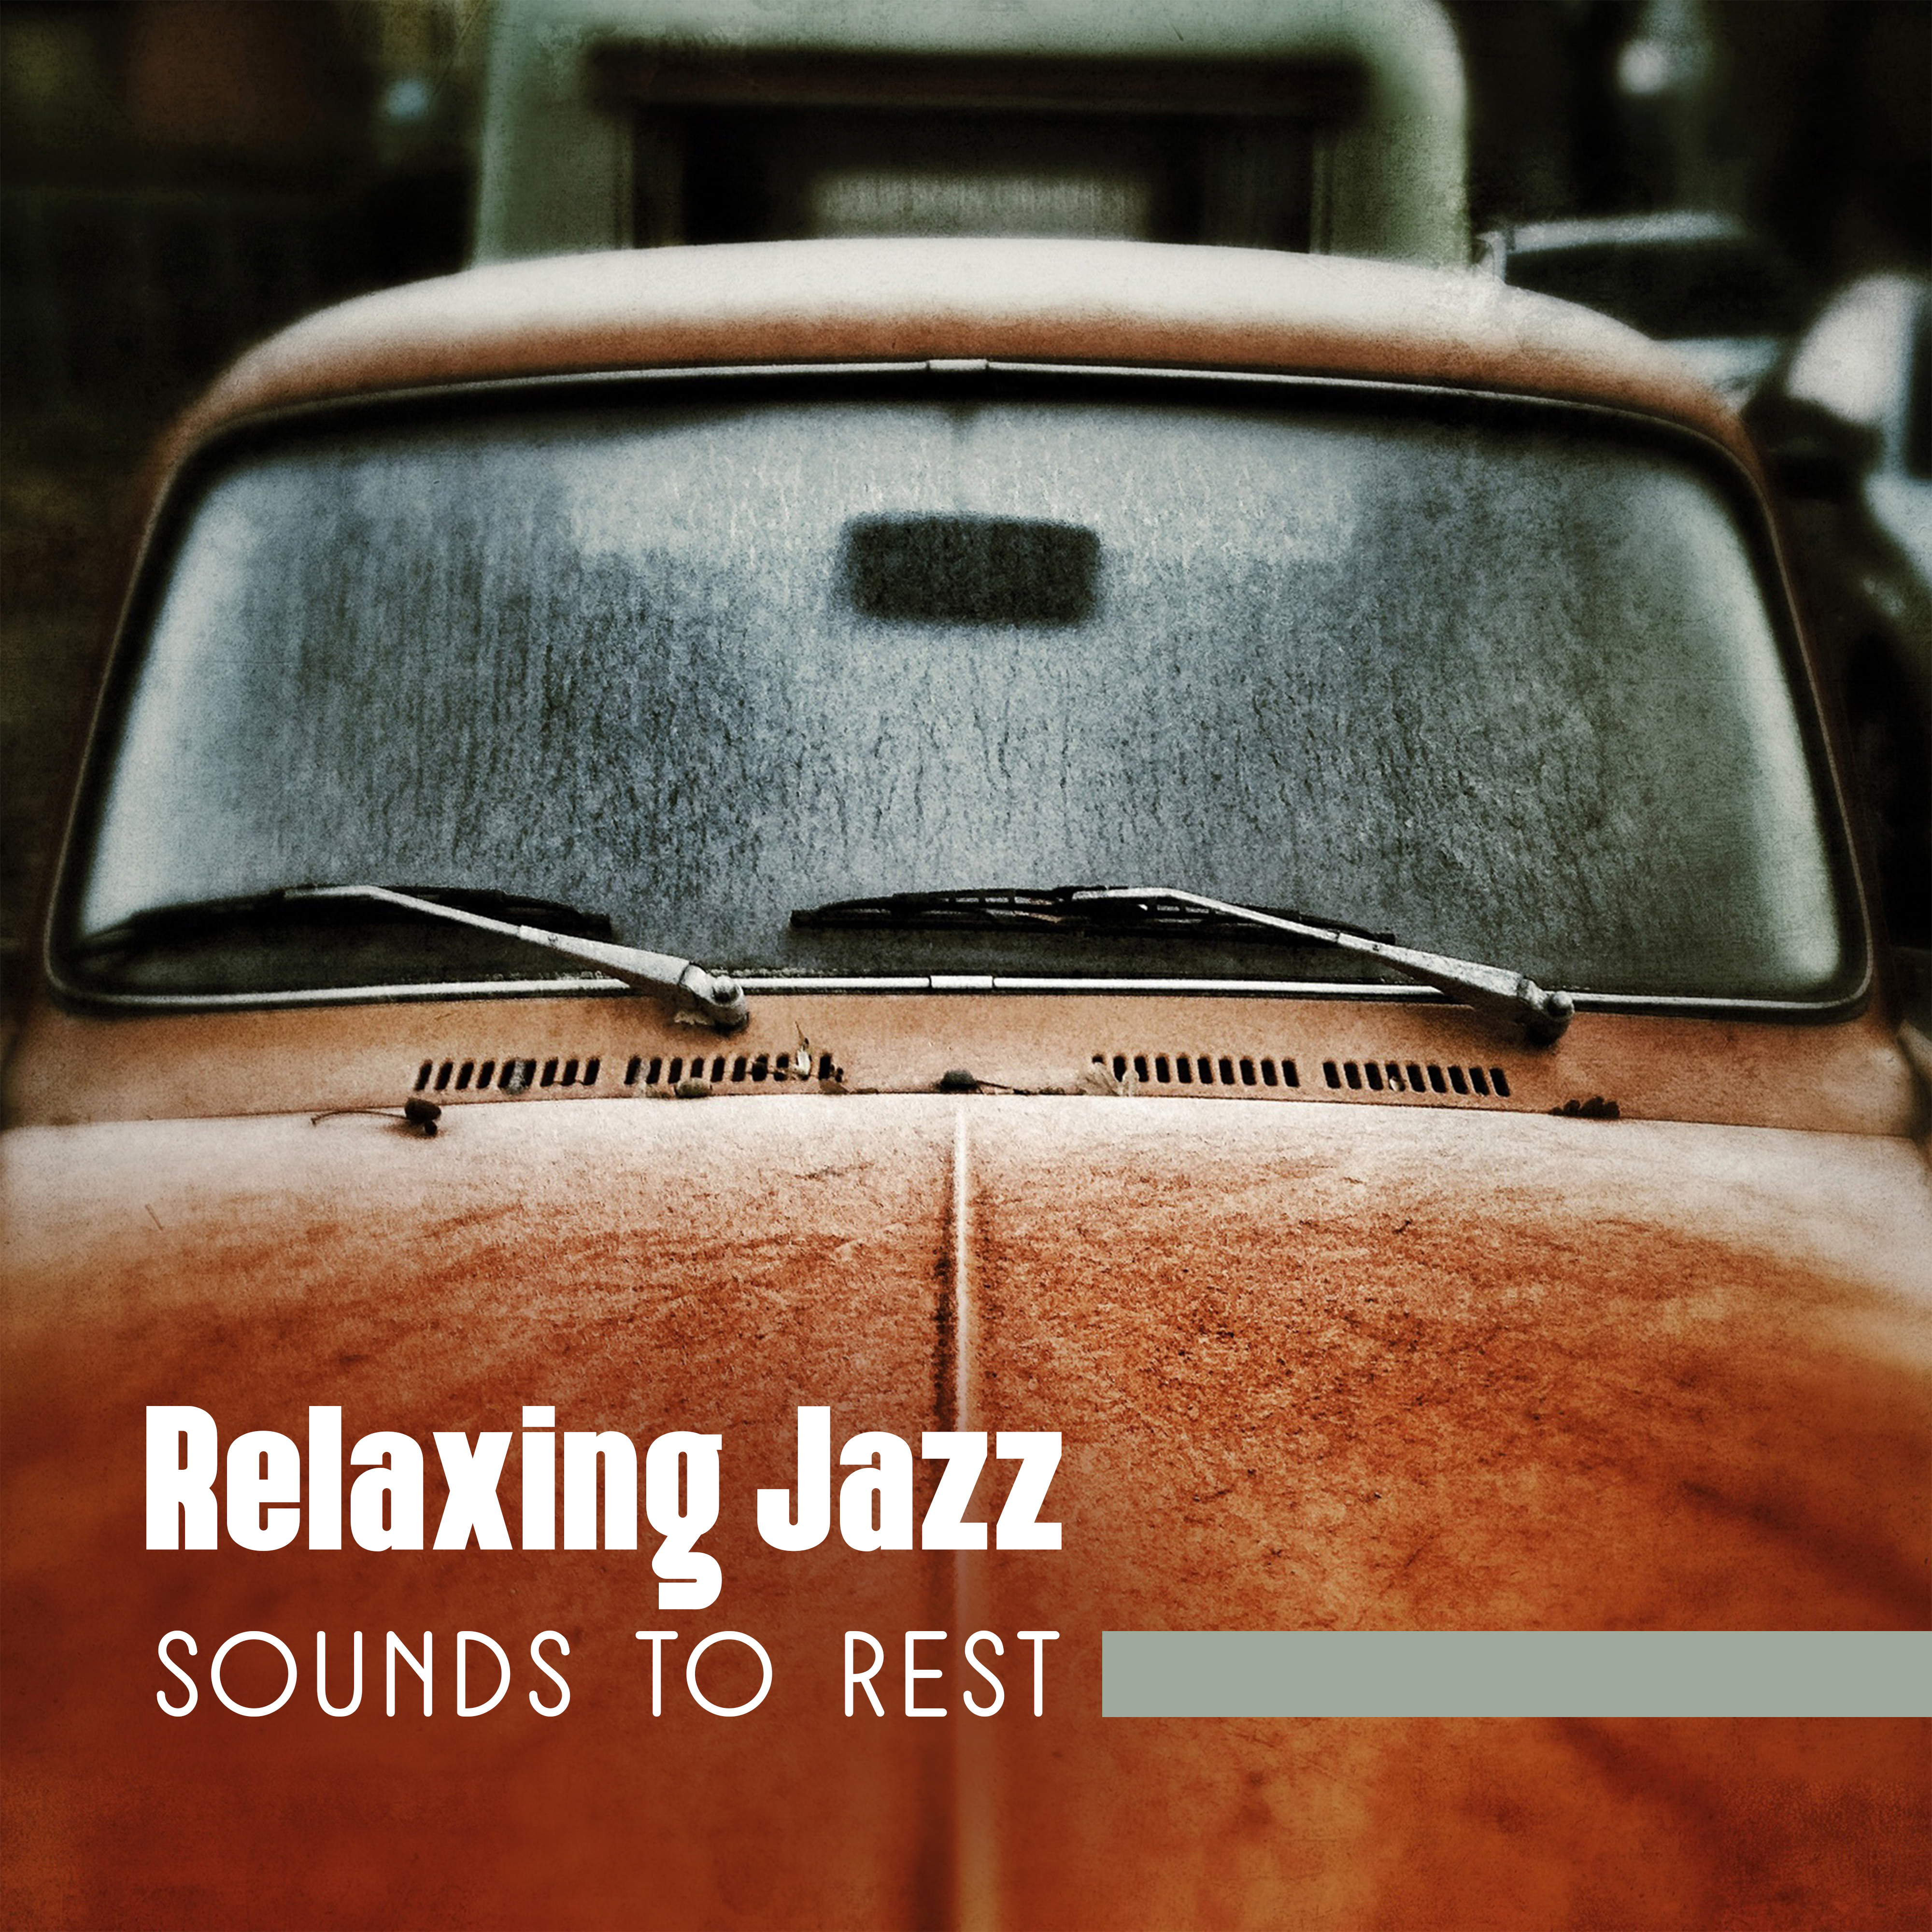 Relaxing Jazz Sounds to Rest  Calming Sounds to Relax, Jazz Music for Mind Peace, No More Stress